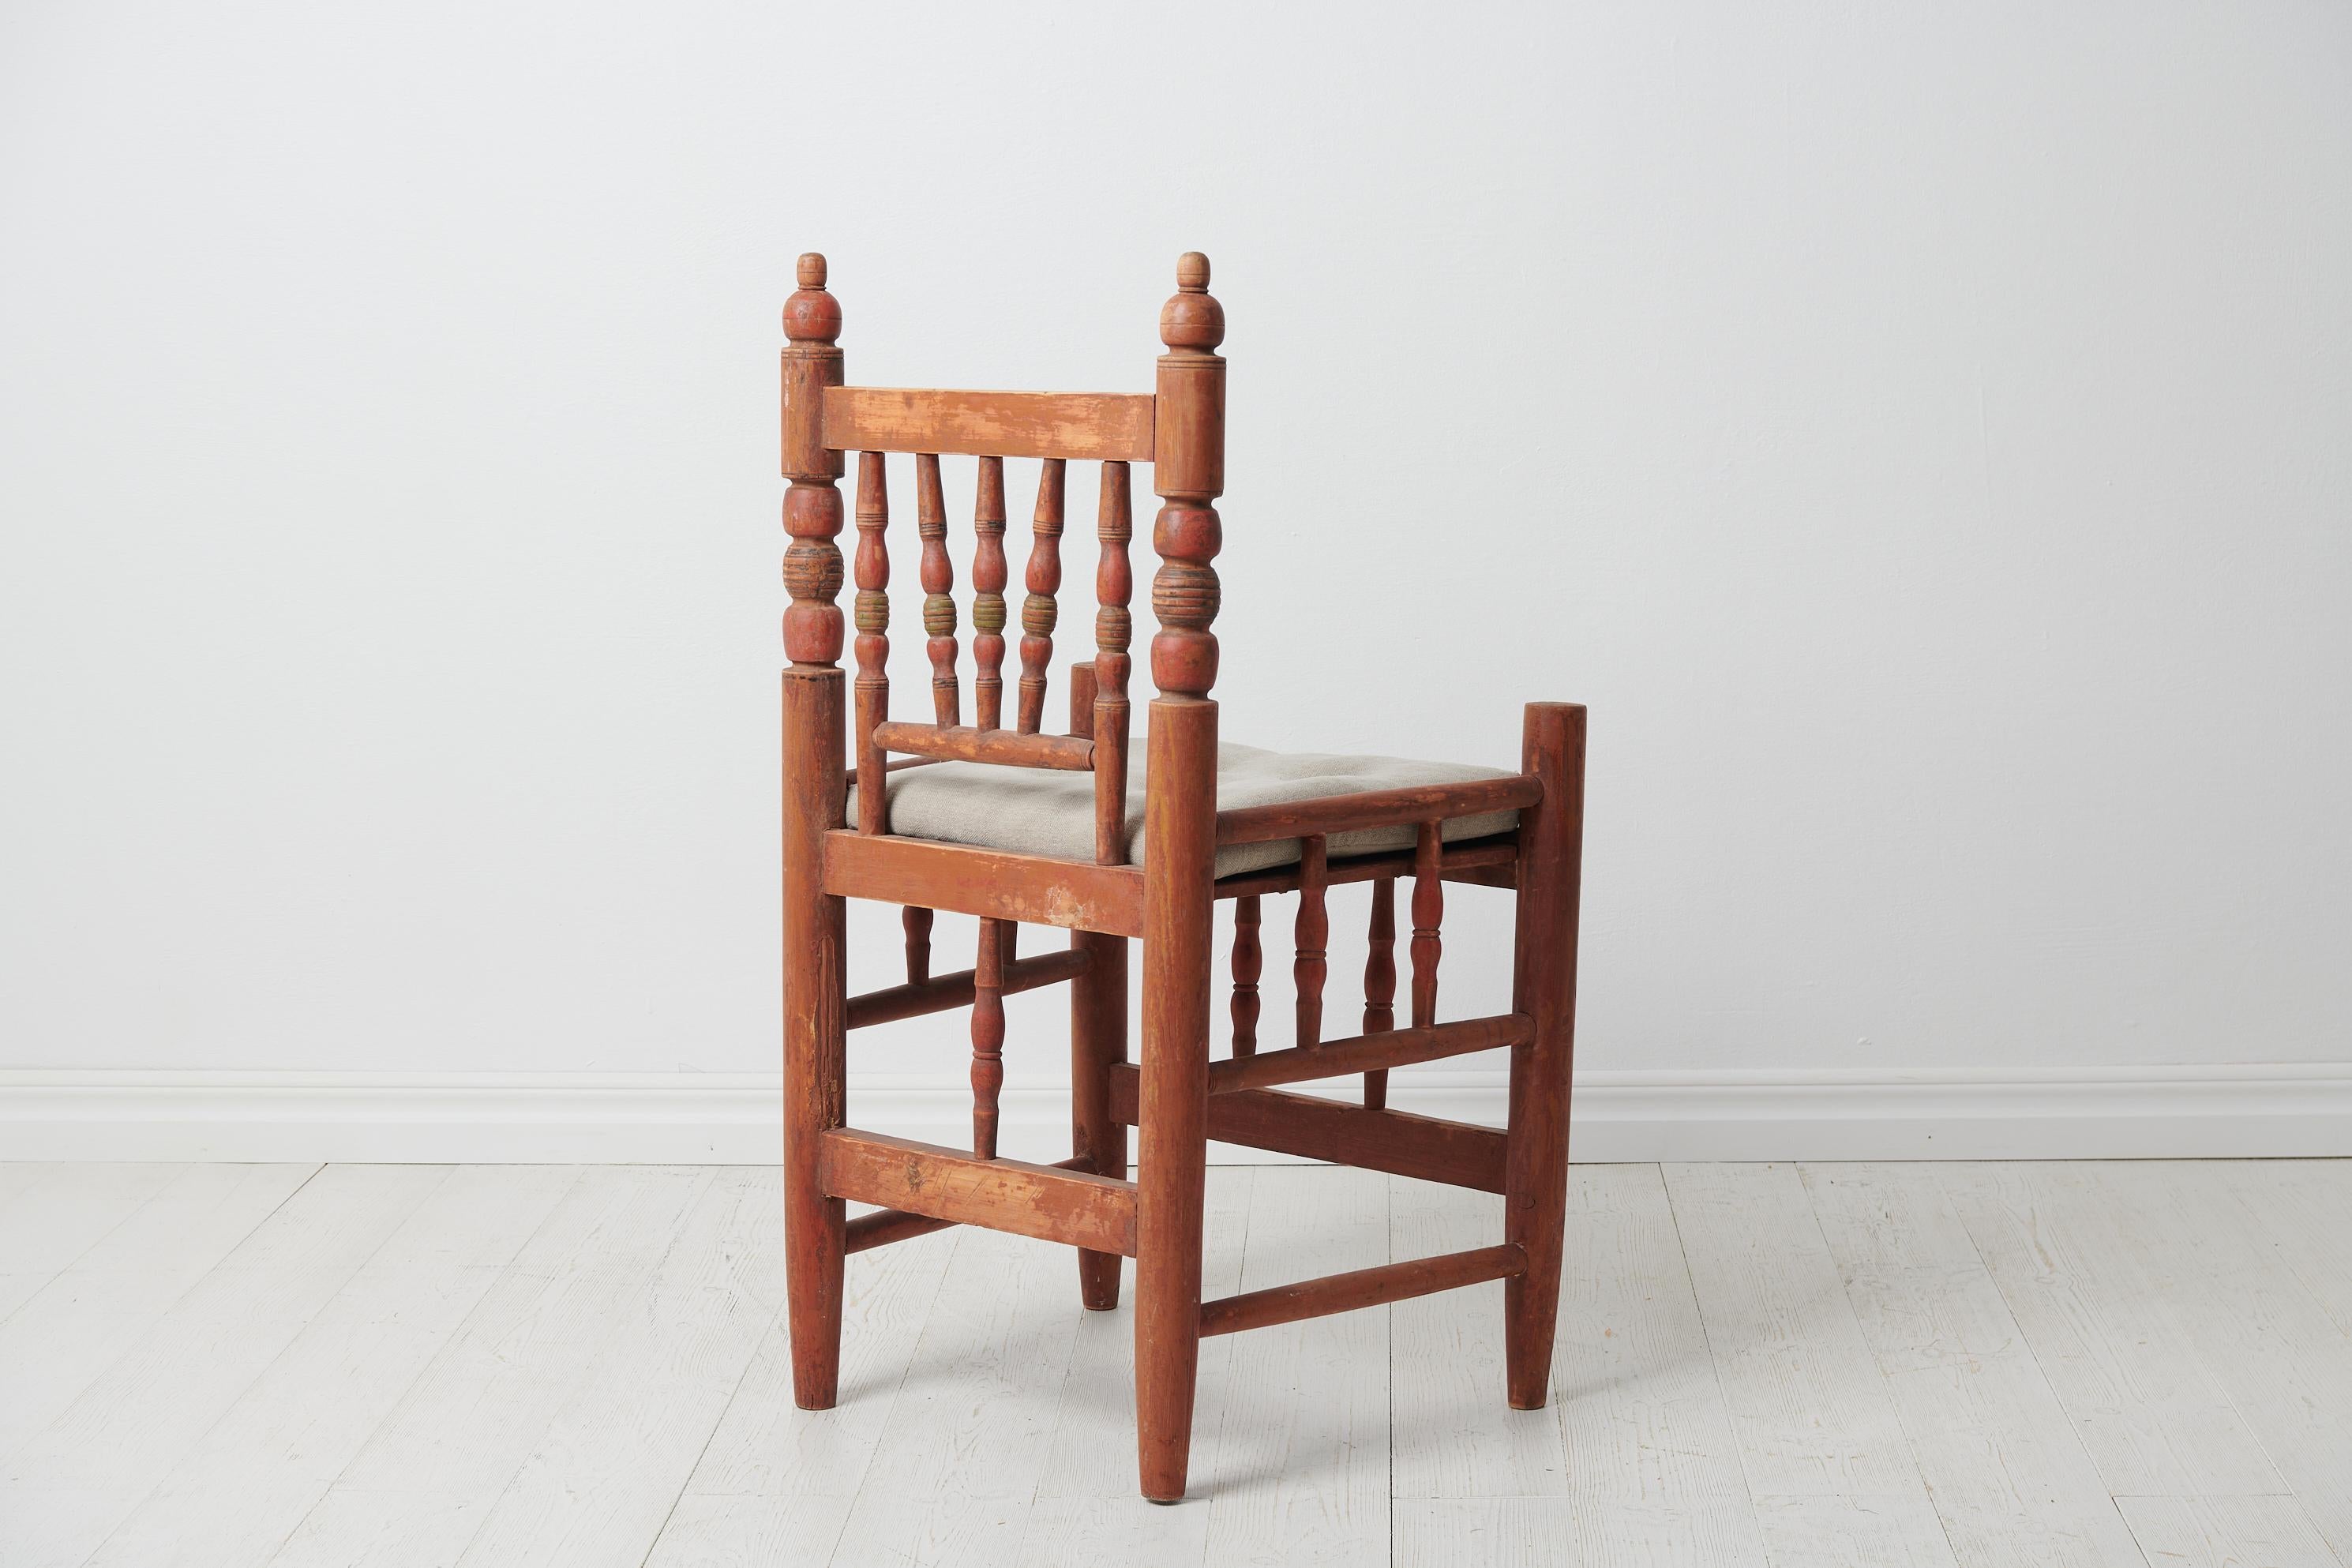 Unusual Swedish Antique Decorated Folk Art Chair In Good Condition For Sale In Kramfors, SE